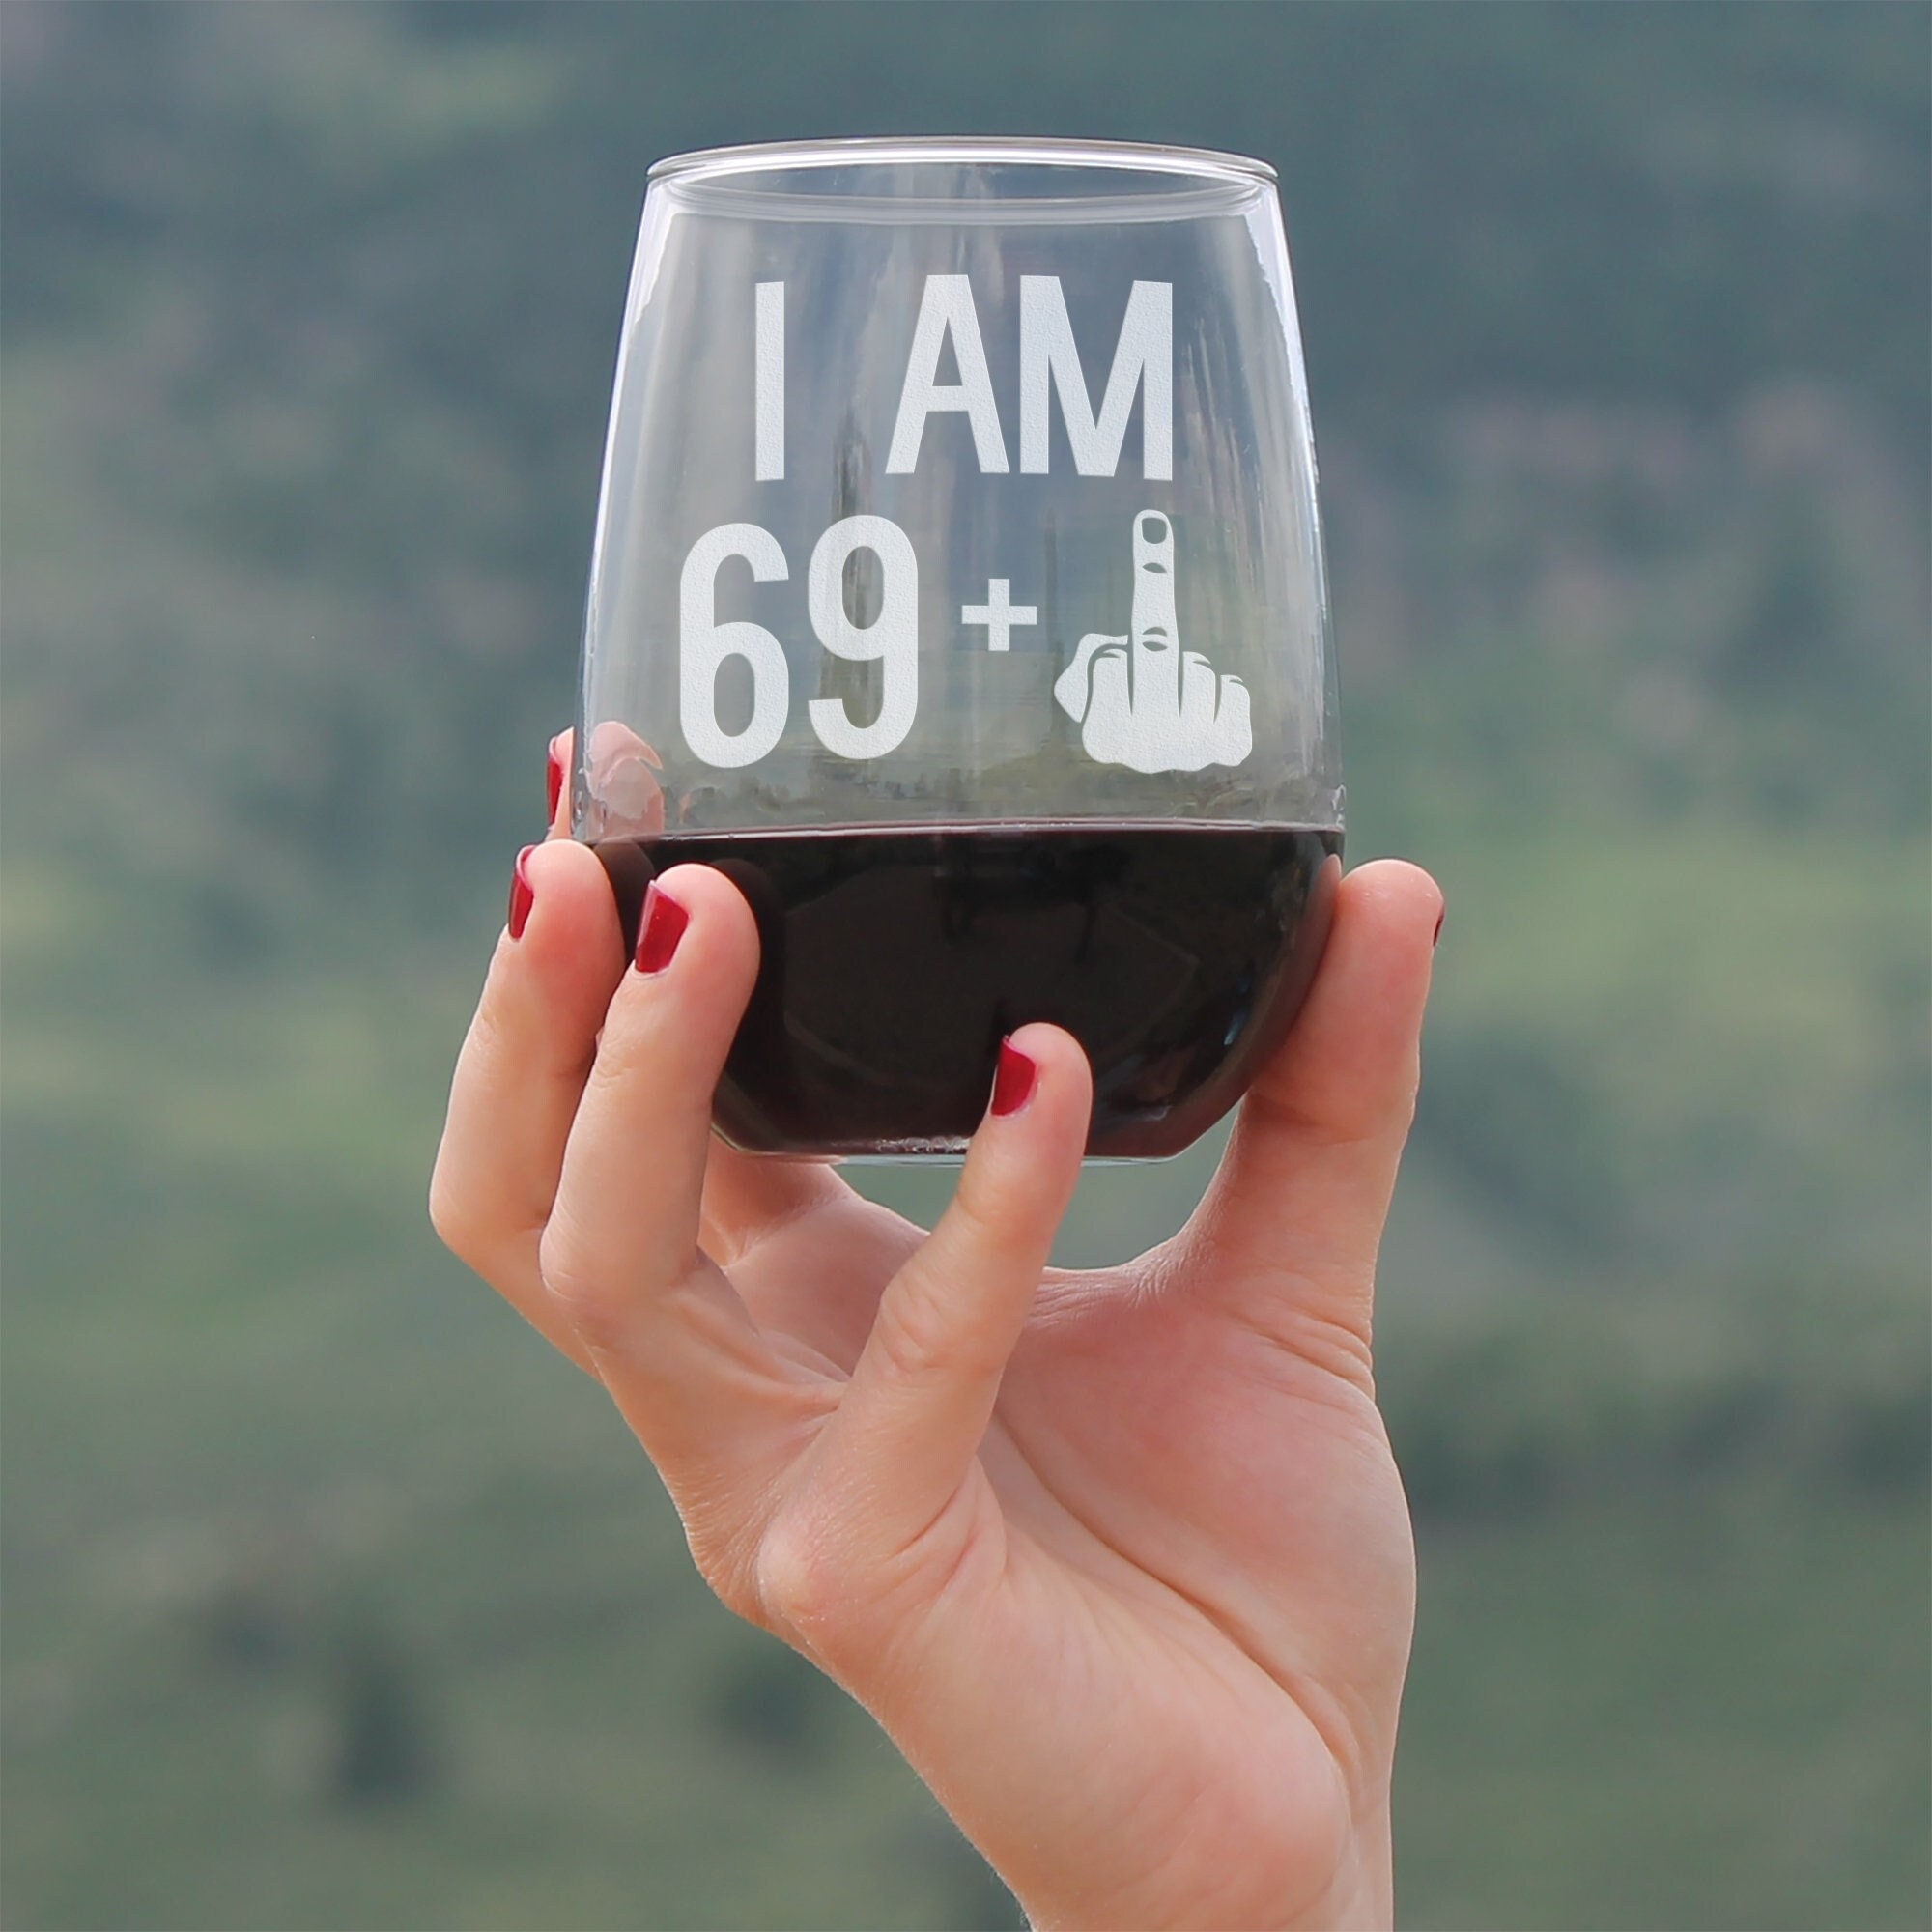 Alpaca Stemless Wine Glass - Cute Funny Themed Decor and Gifts for Alp -  bevvee